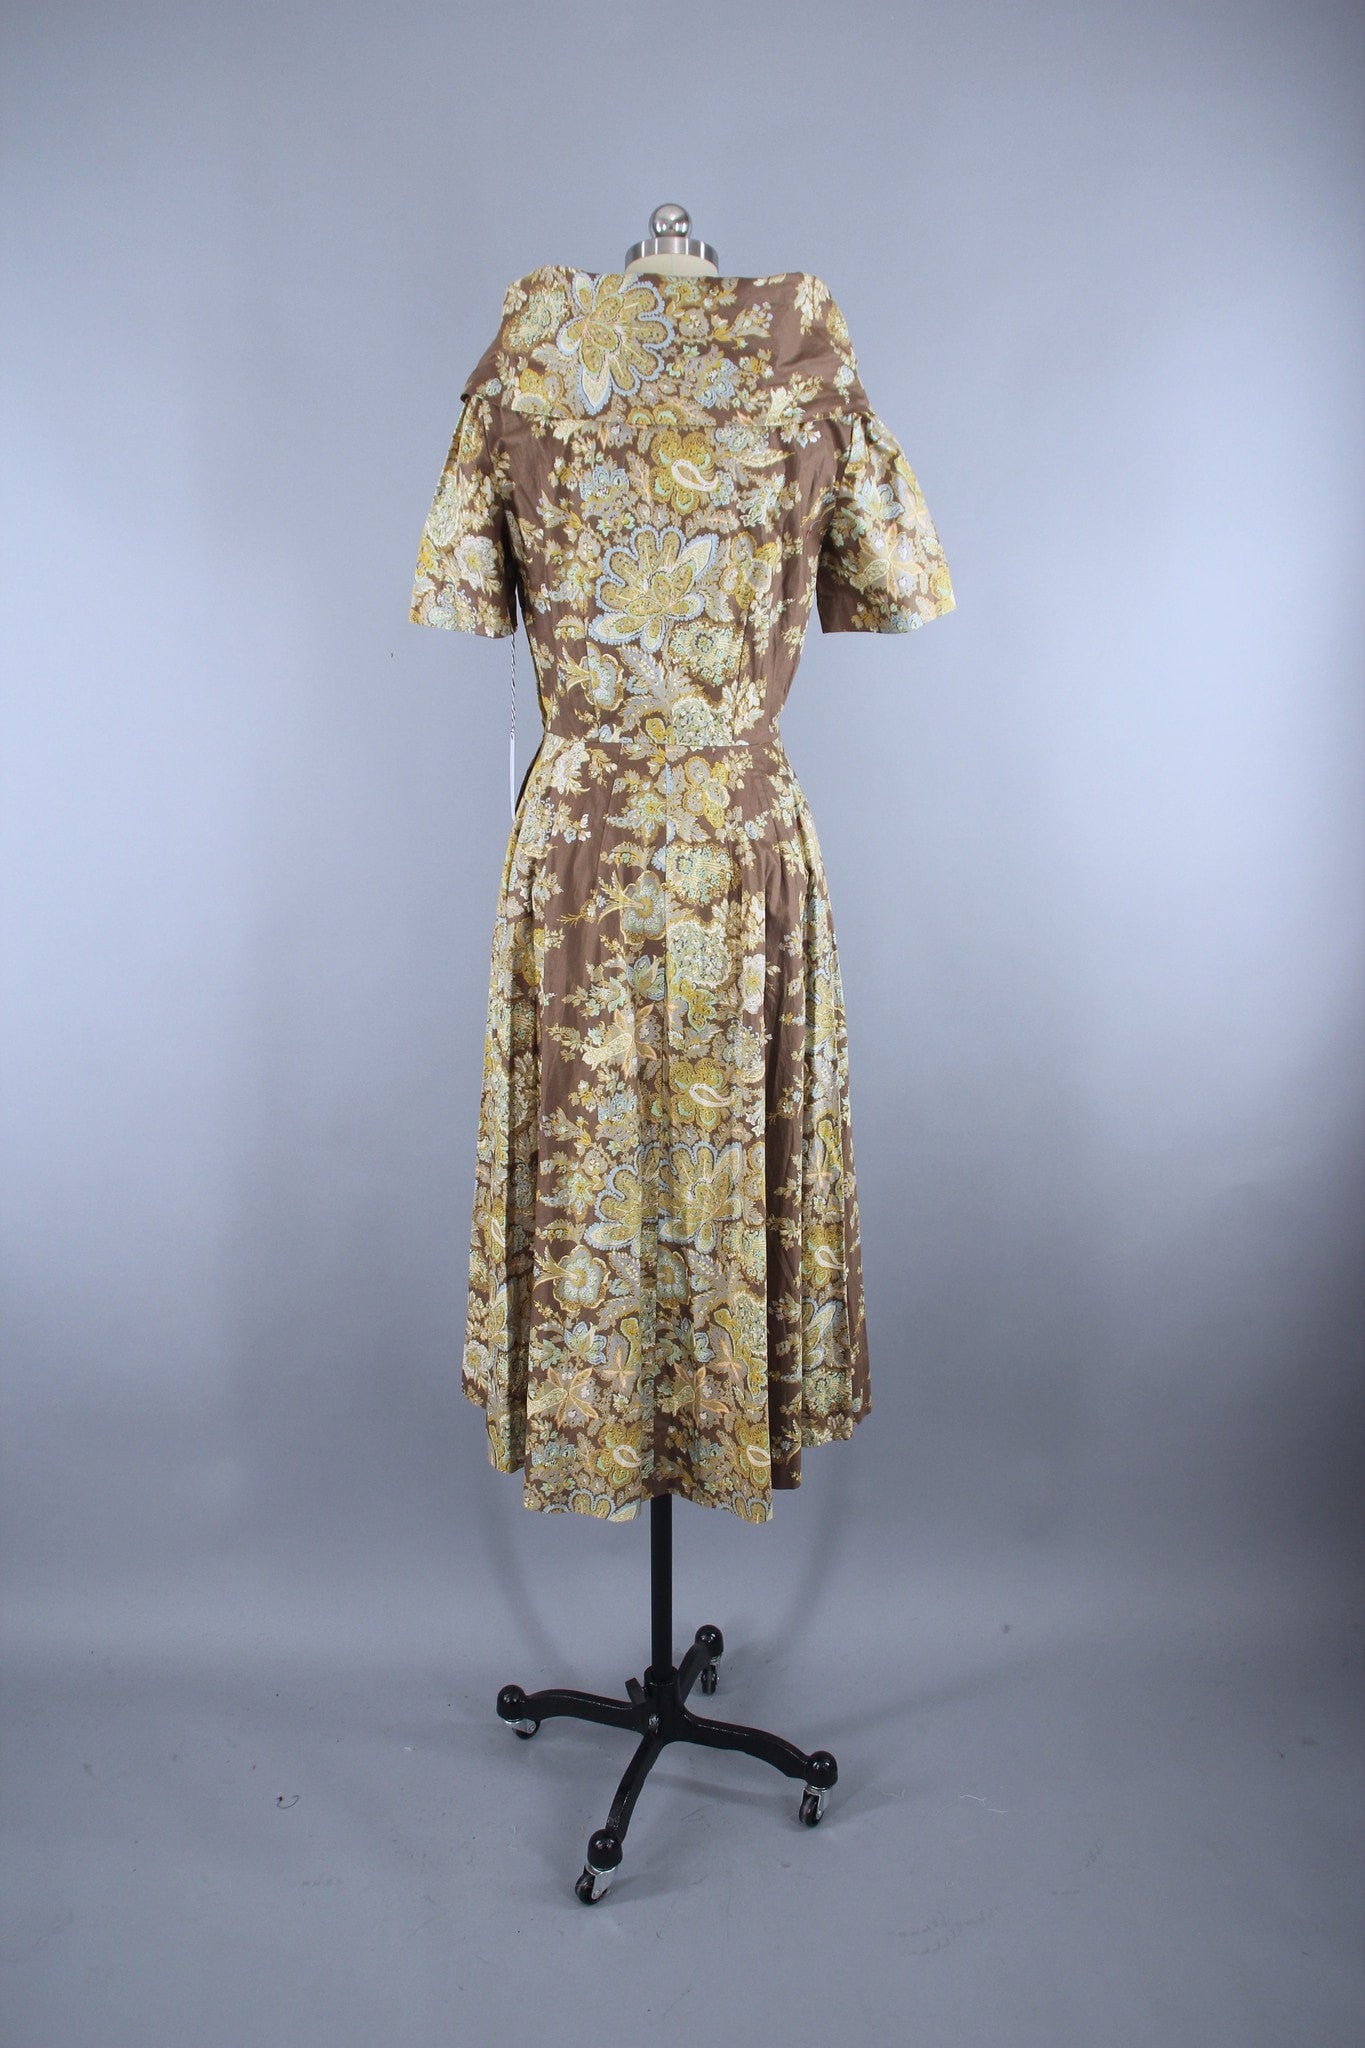 Vintage 1950s New Look Garden Party Dress in Brown & Blue Floral Print - ThisBlueBird